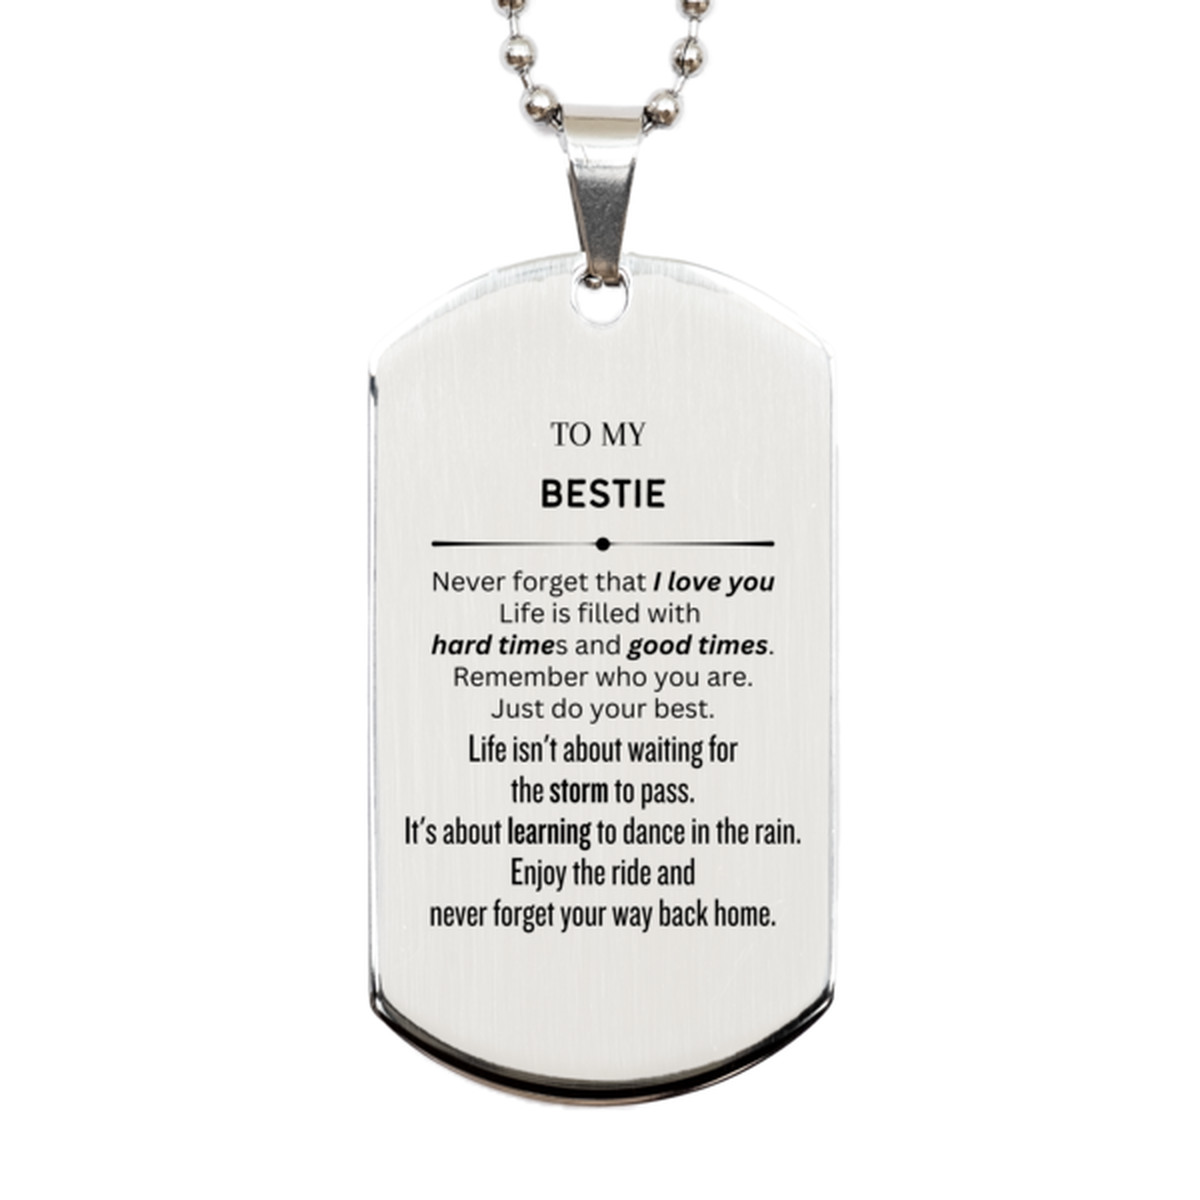 Christmas Bestie Silver Dog Tag Gifts, To My Bestie Birthday Thank You Gifts For Bestie, Graduation Unique Gifts For Bestie To My Bestie Never forget that I love you life is filled with hard times and good times. Remember who you are. Just do your best